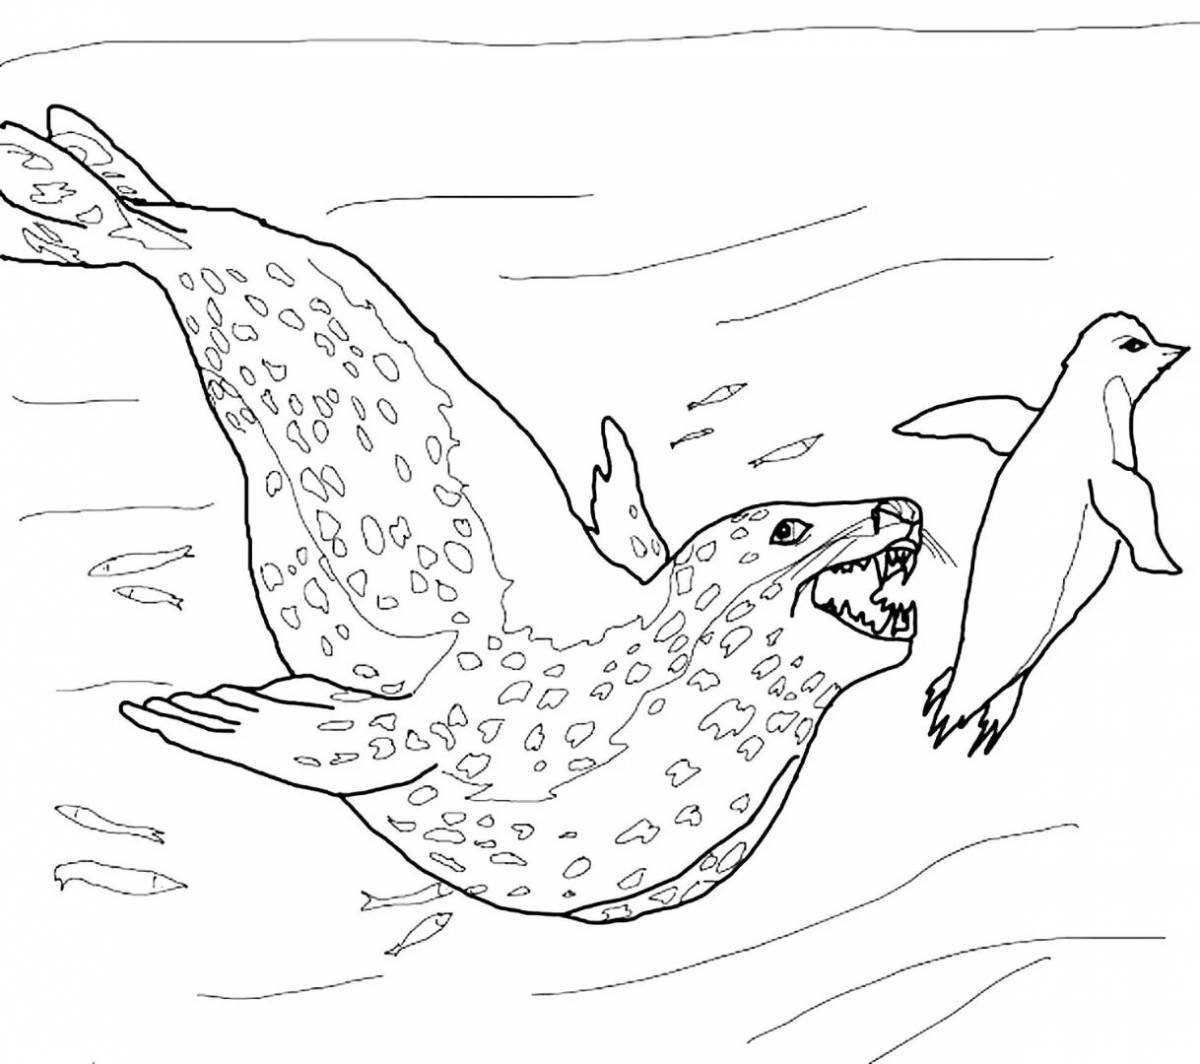 Intriguing animals of Antarctica coloring pages for kids